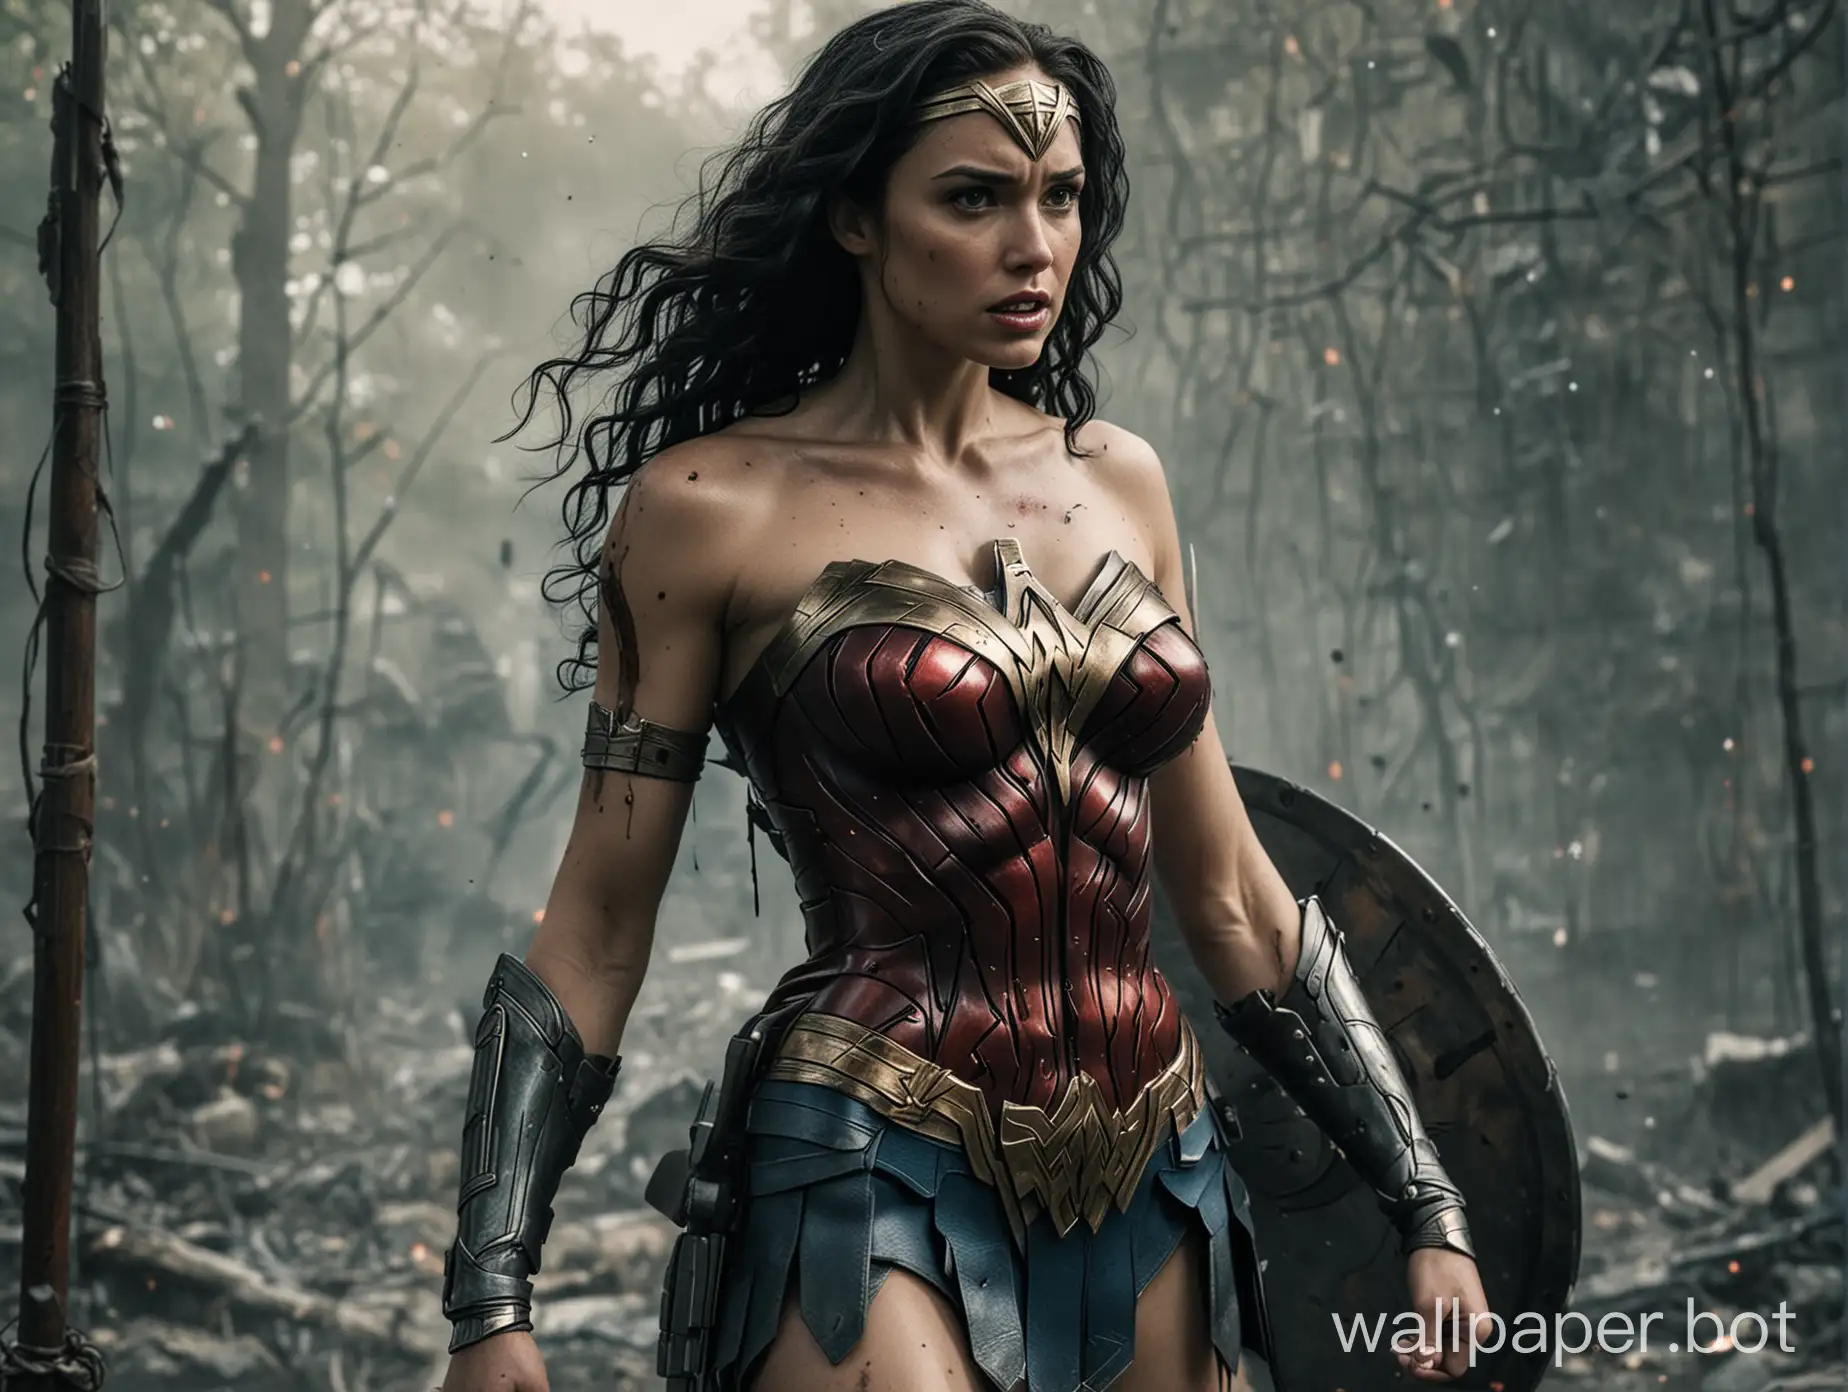 wonder woman, lean body,  big breast, torned armored,  almost naked. lost in battle, bleeding.